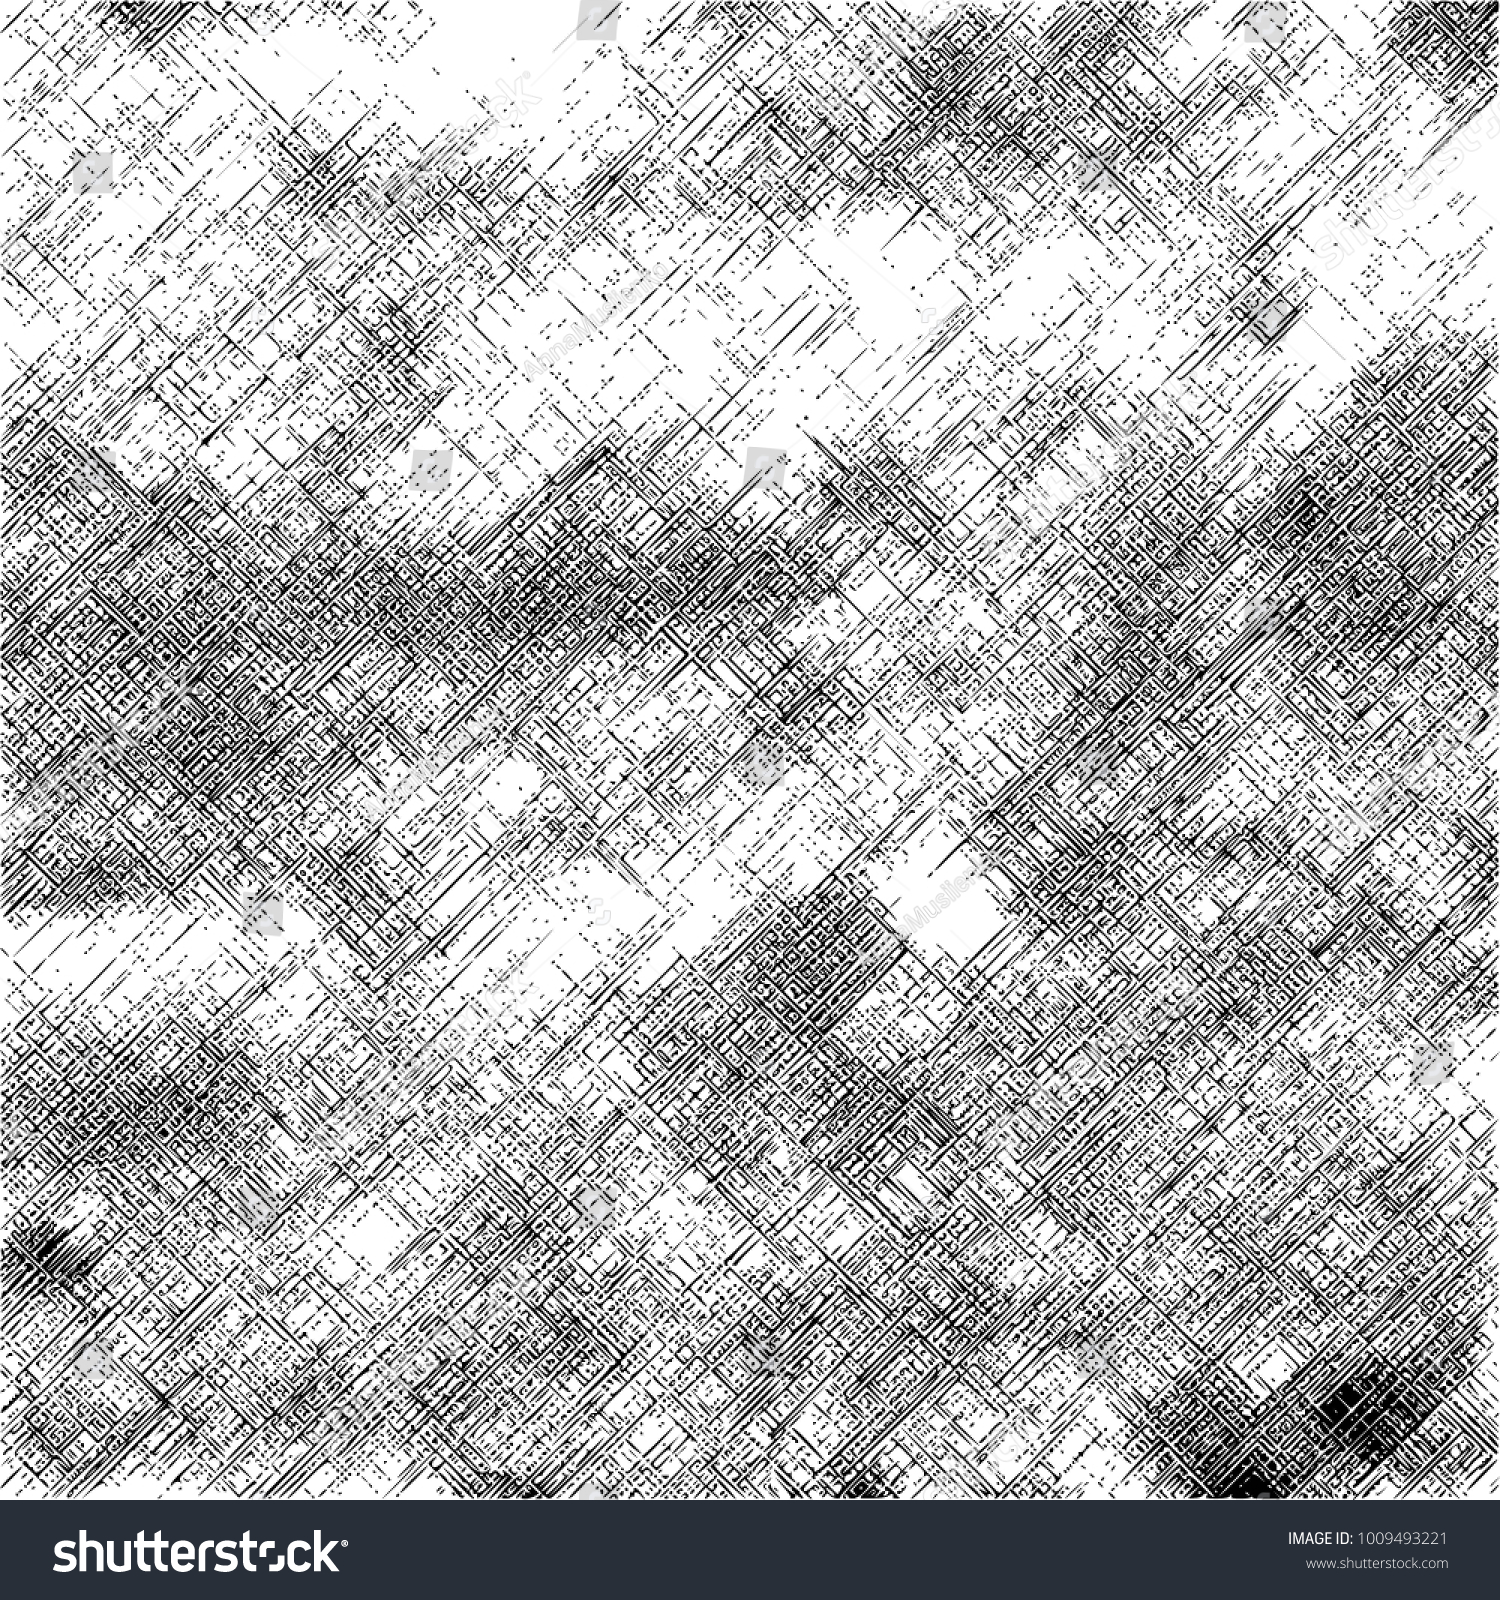 Grunge Dust Messy Background Easy Create Stock Vector 1009493221 ...